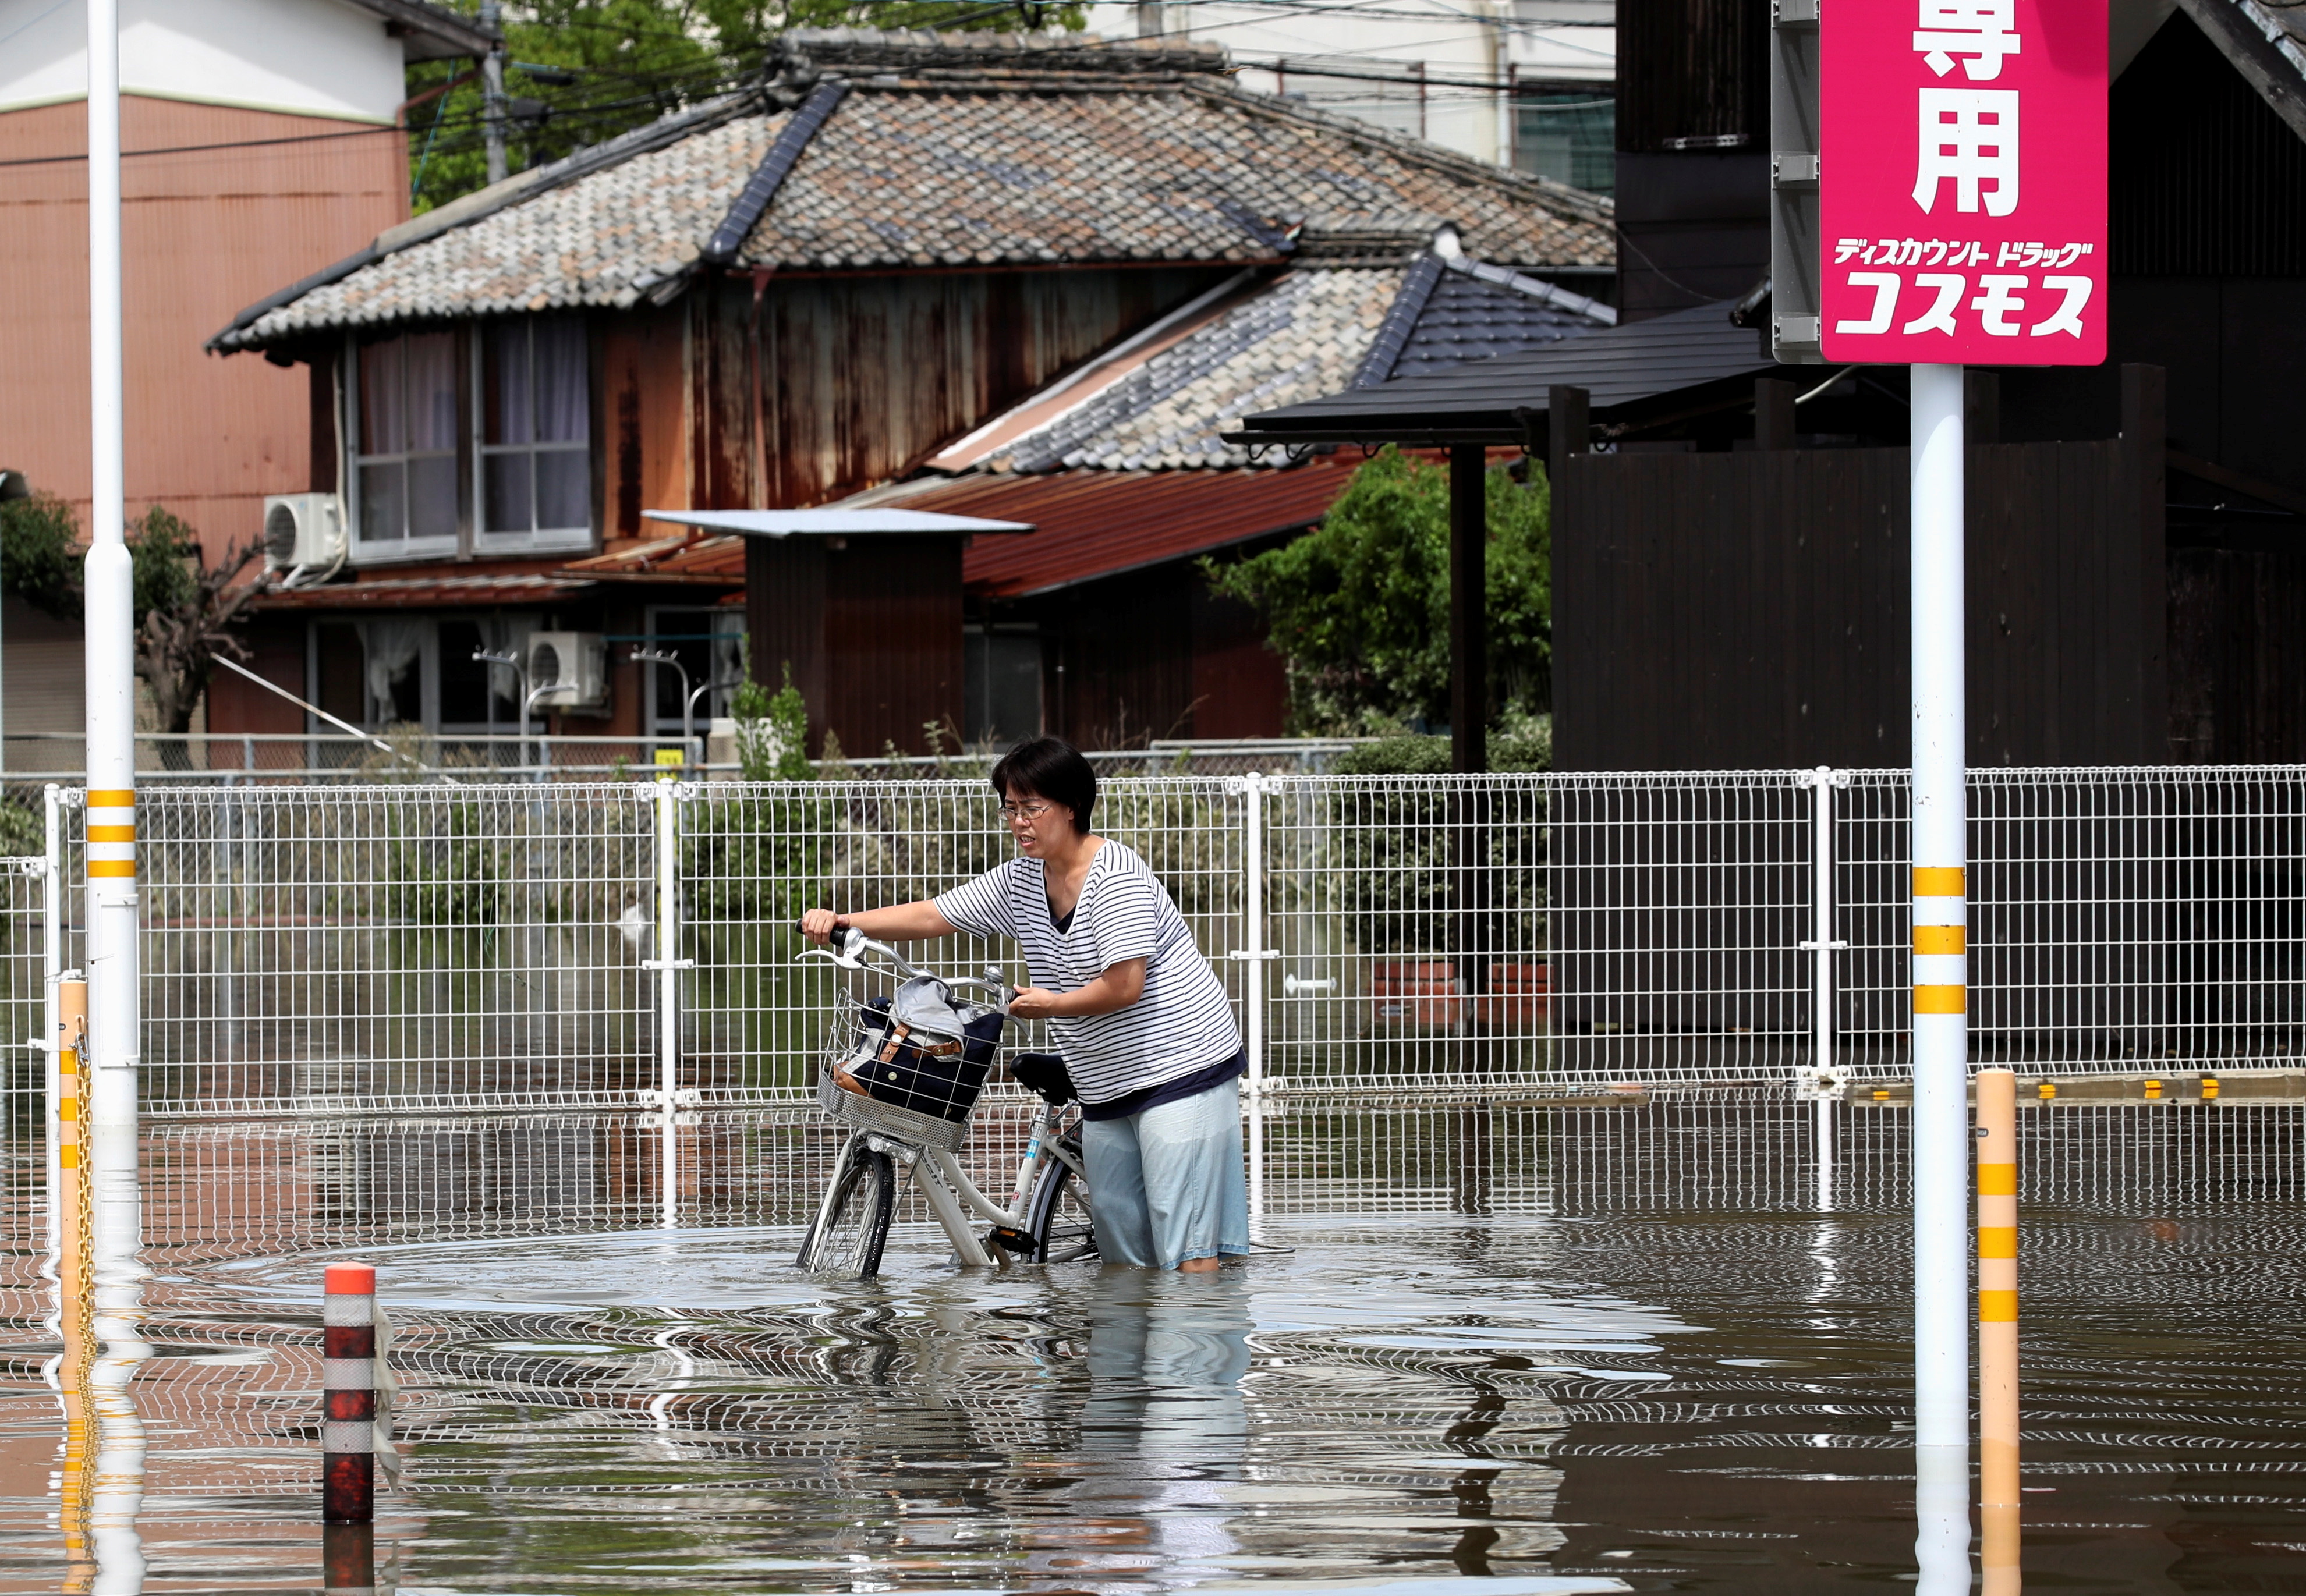 A woman pushes a bicycle through a flooded street in Takeo, Saga Prefecture, western Japan